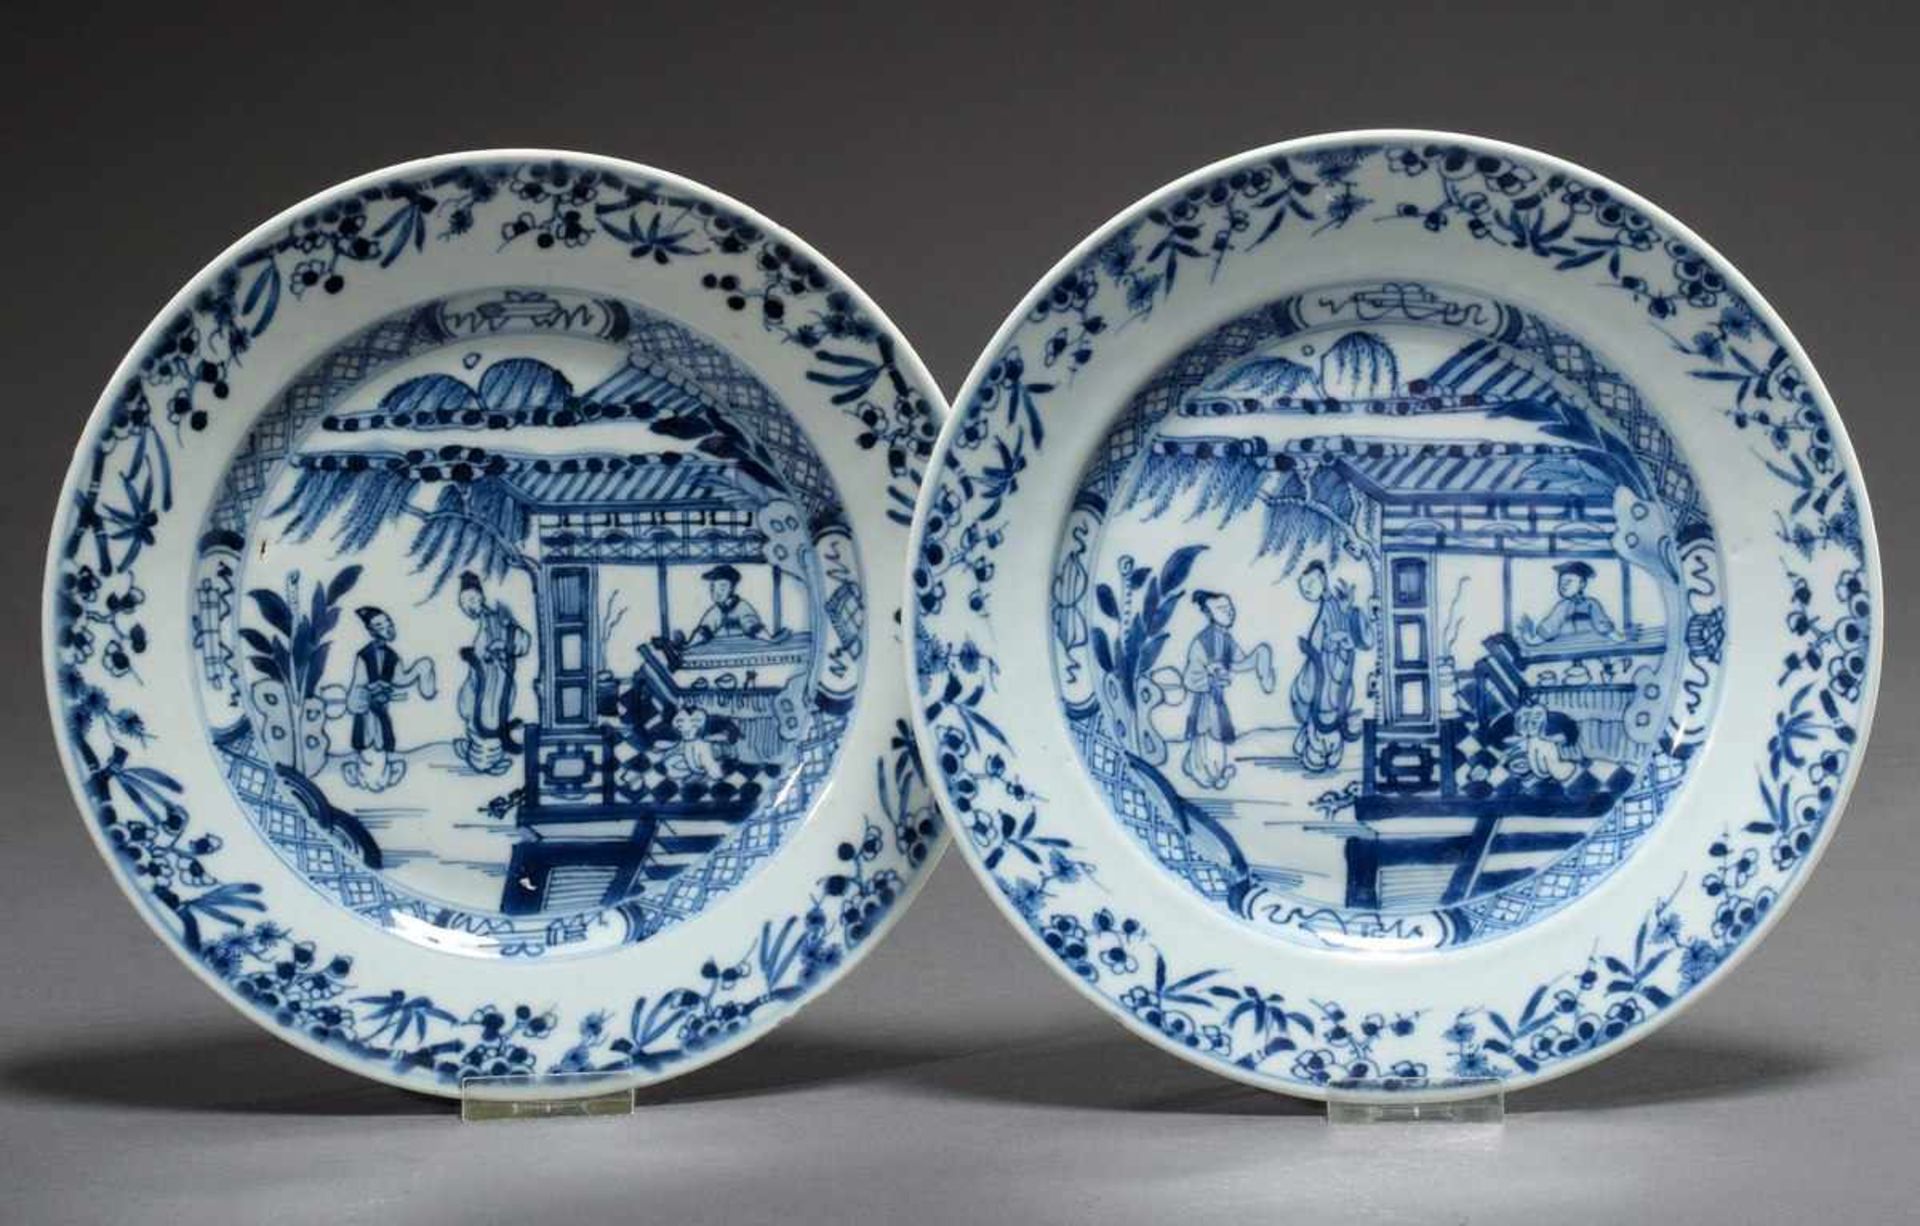 Pair of plates with blue painting decoration "Teahouse scenes", Ø 23cm, 1x chipped at the edge, 1x